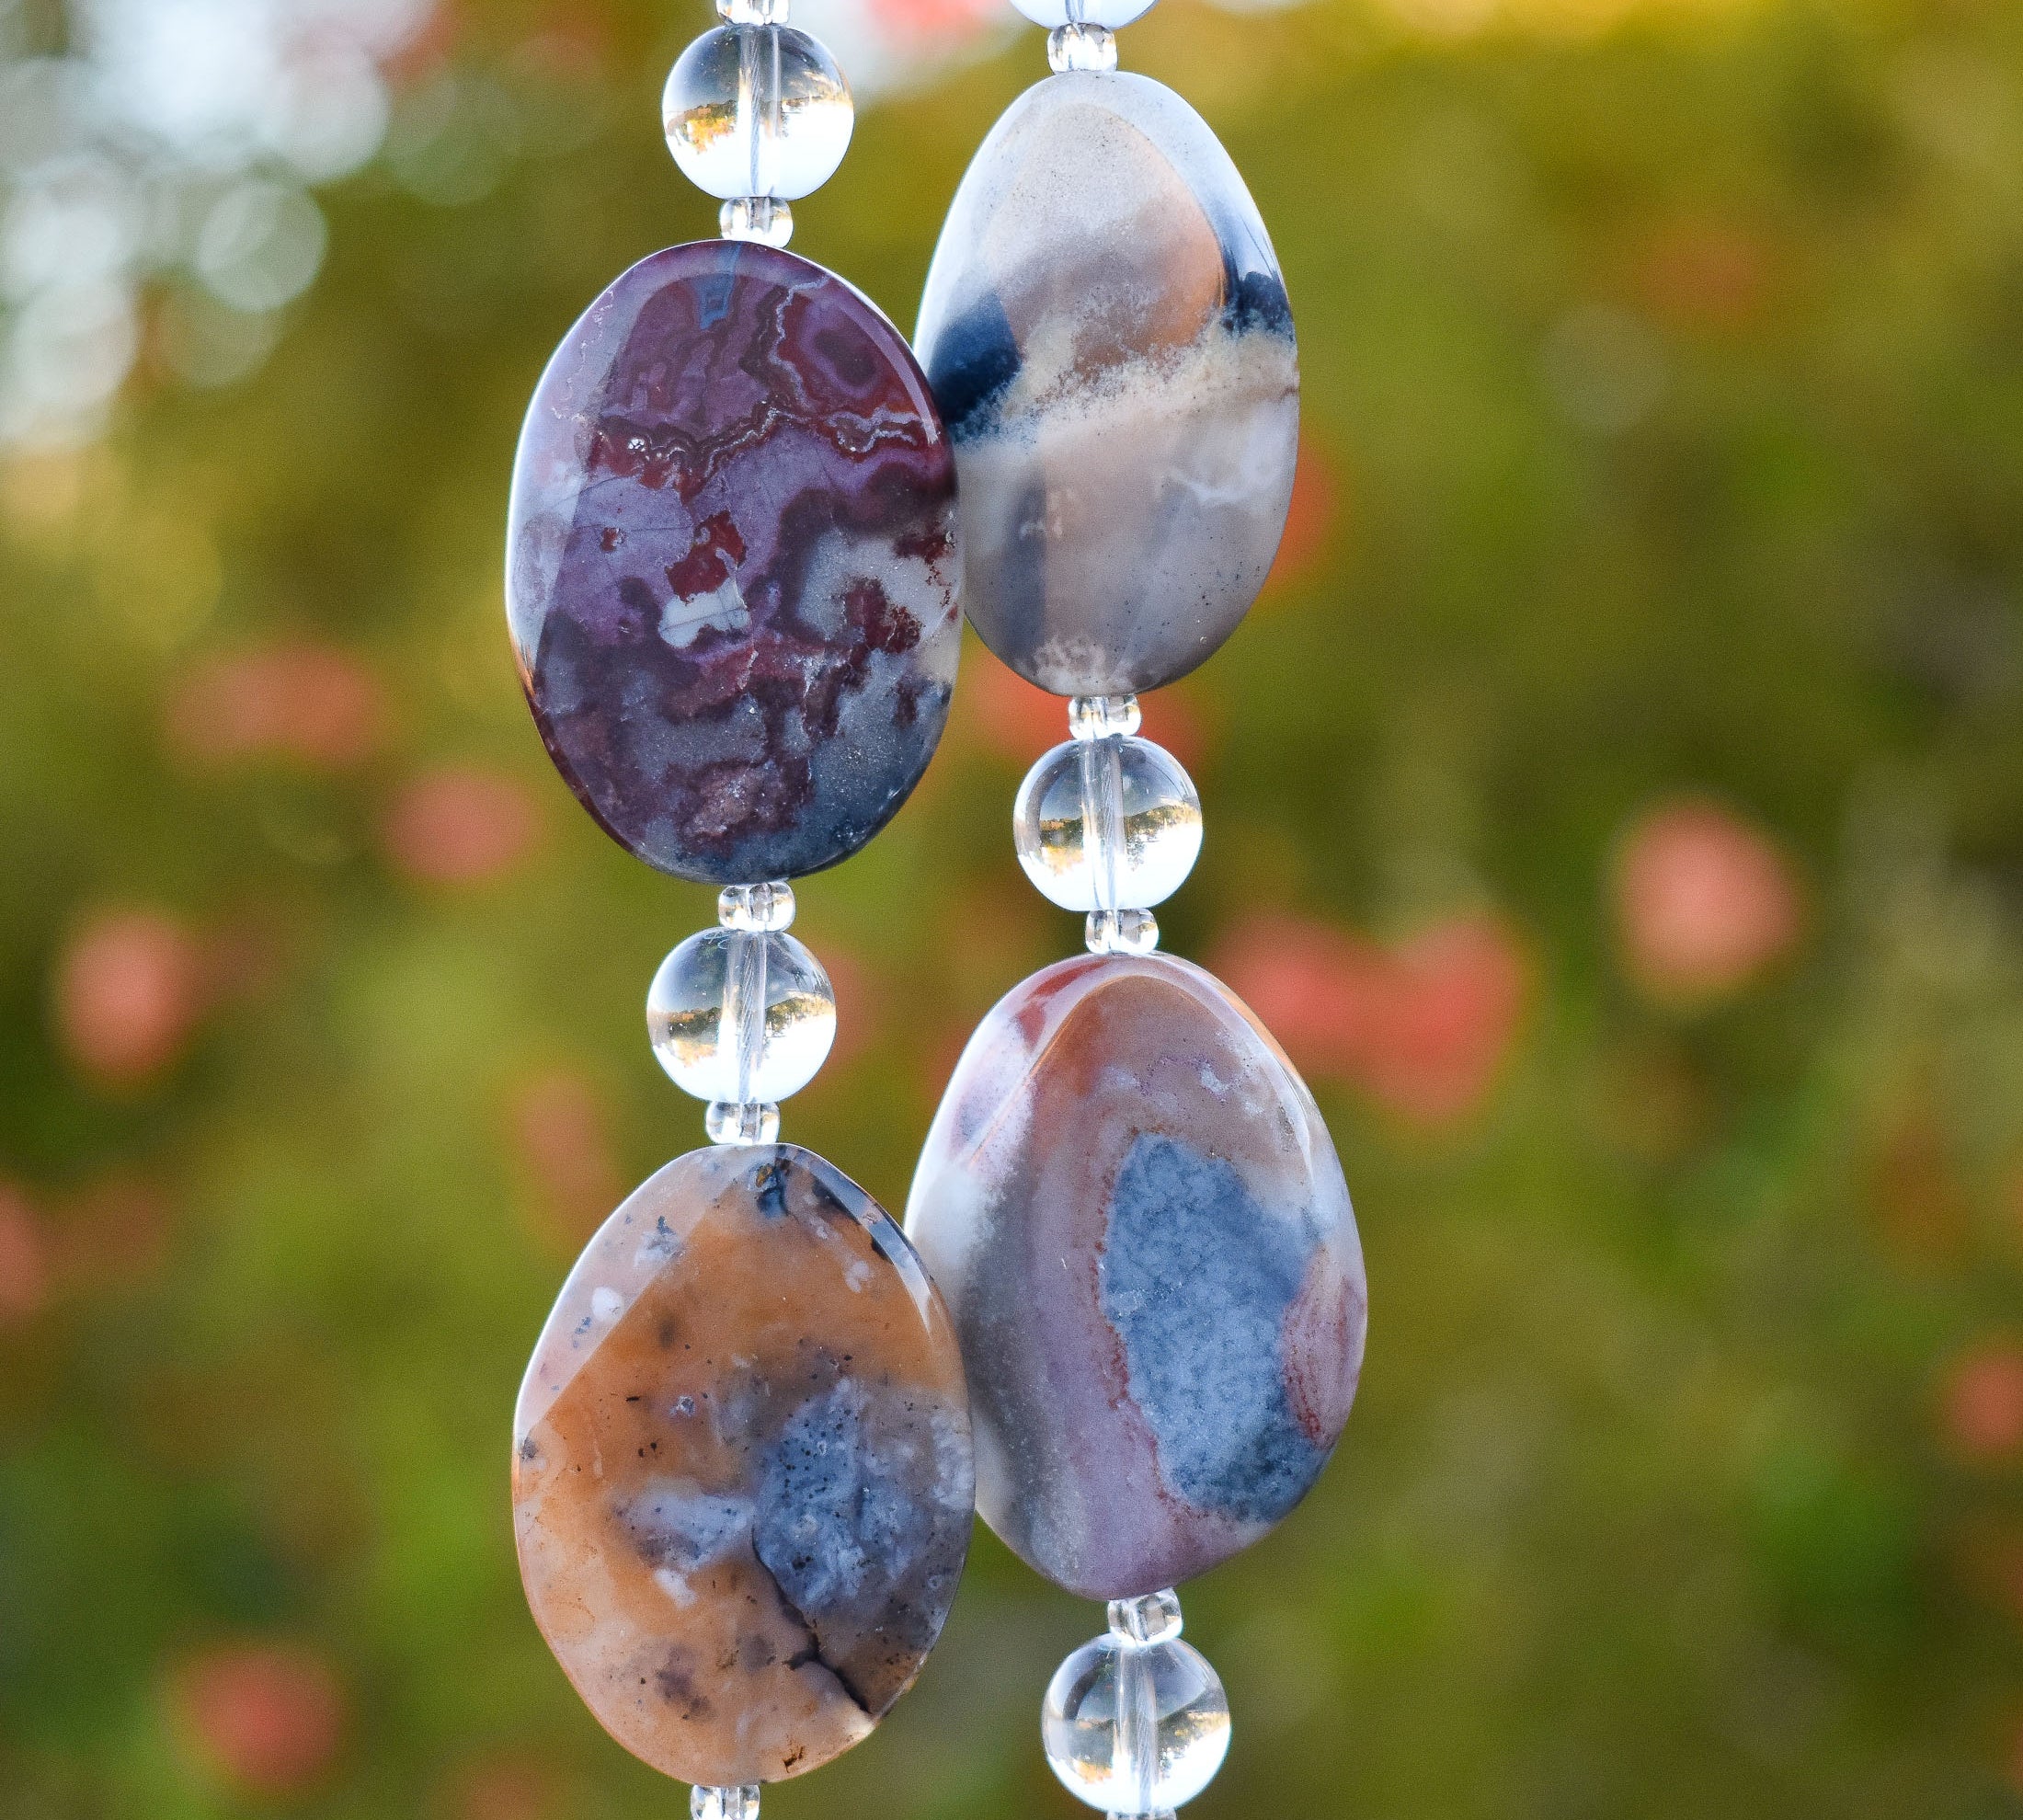 Large, oval-shaped jasper stone beads strung with smaller clear glass beads, hanging vertically in front of plant with orange flowers.